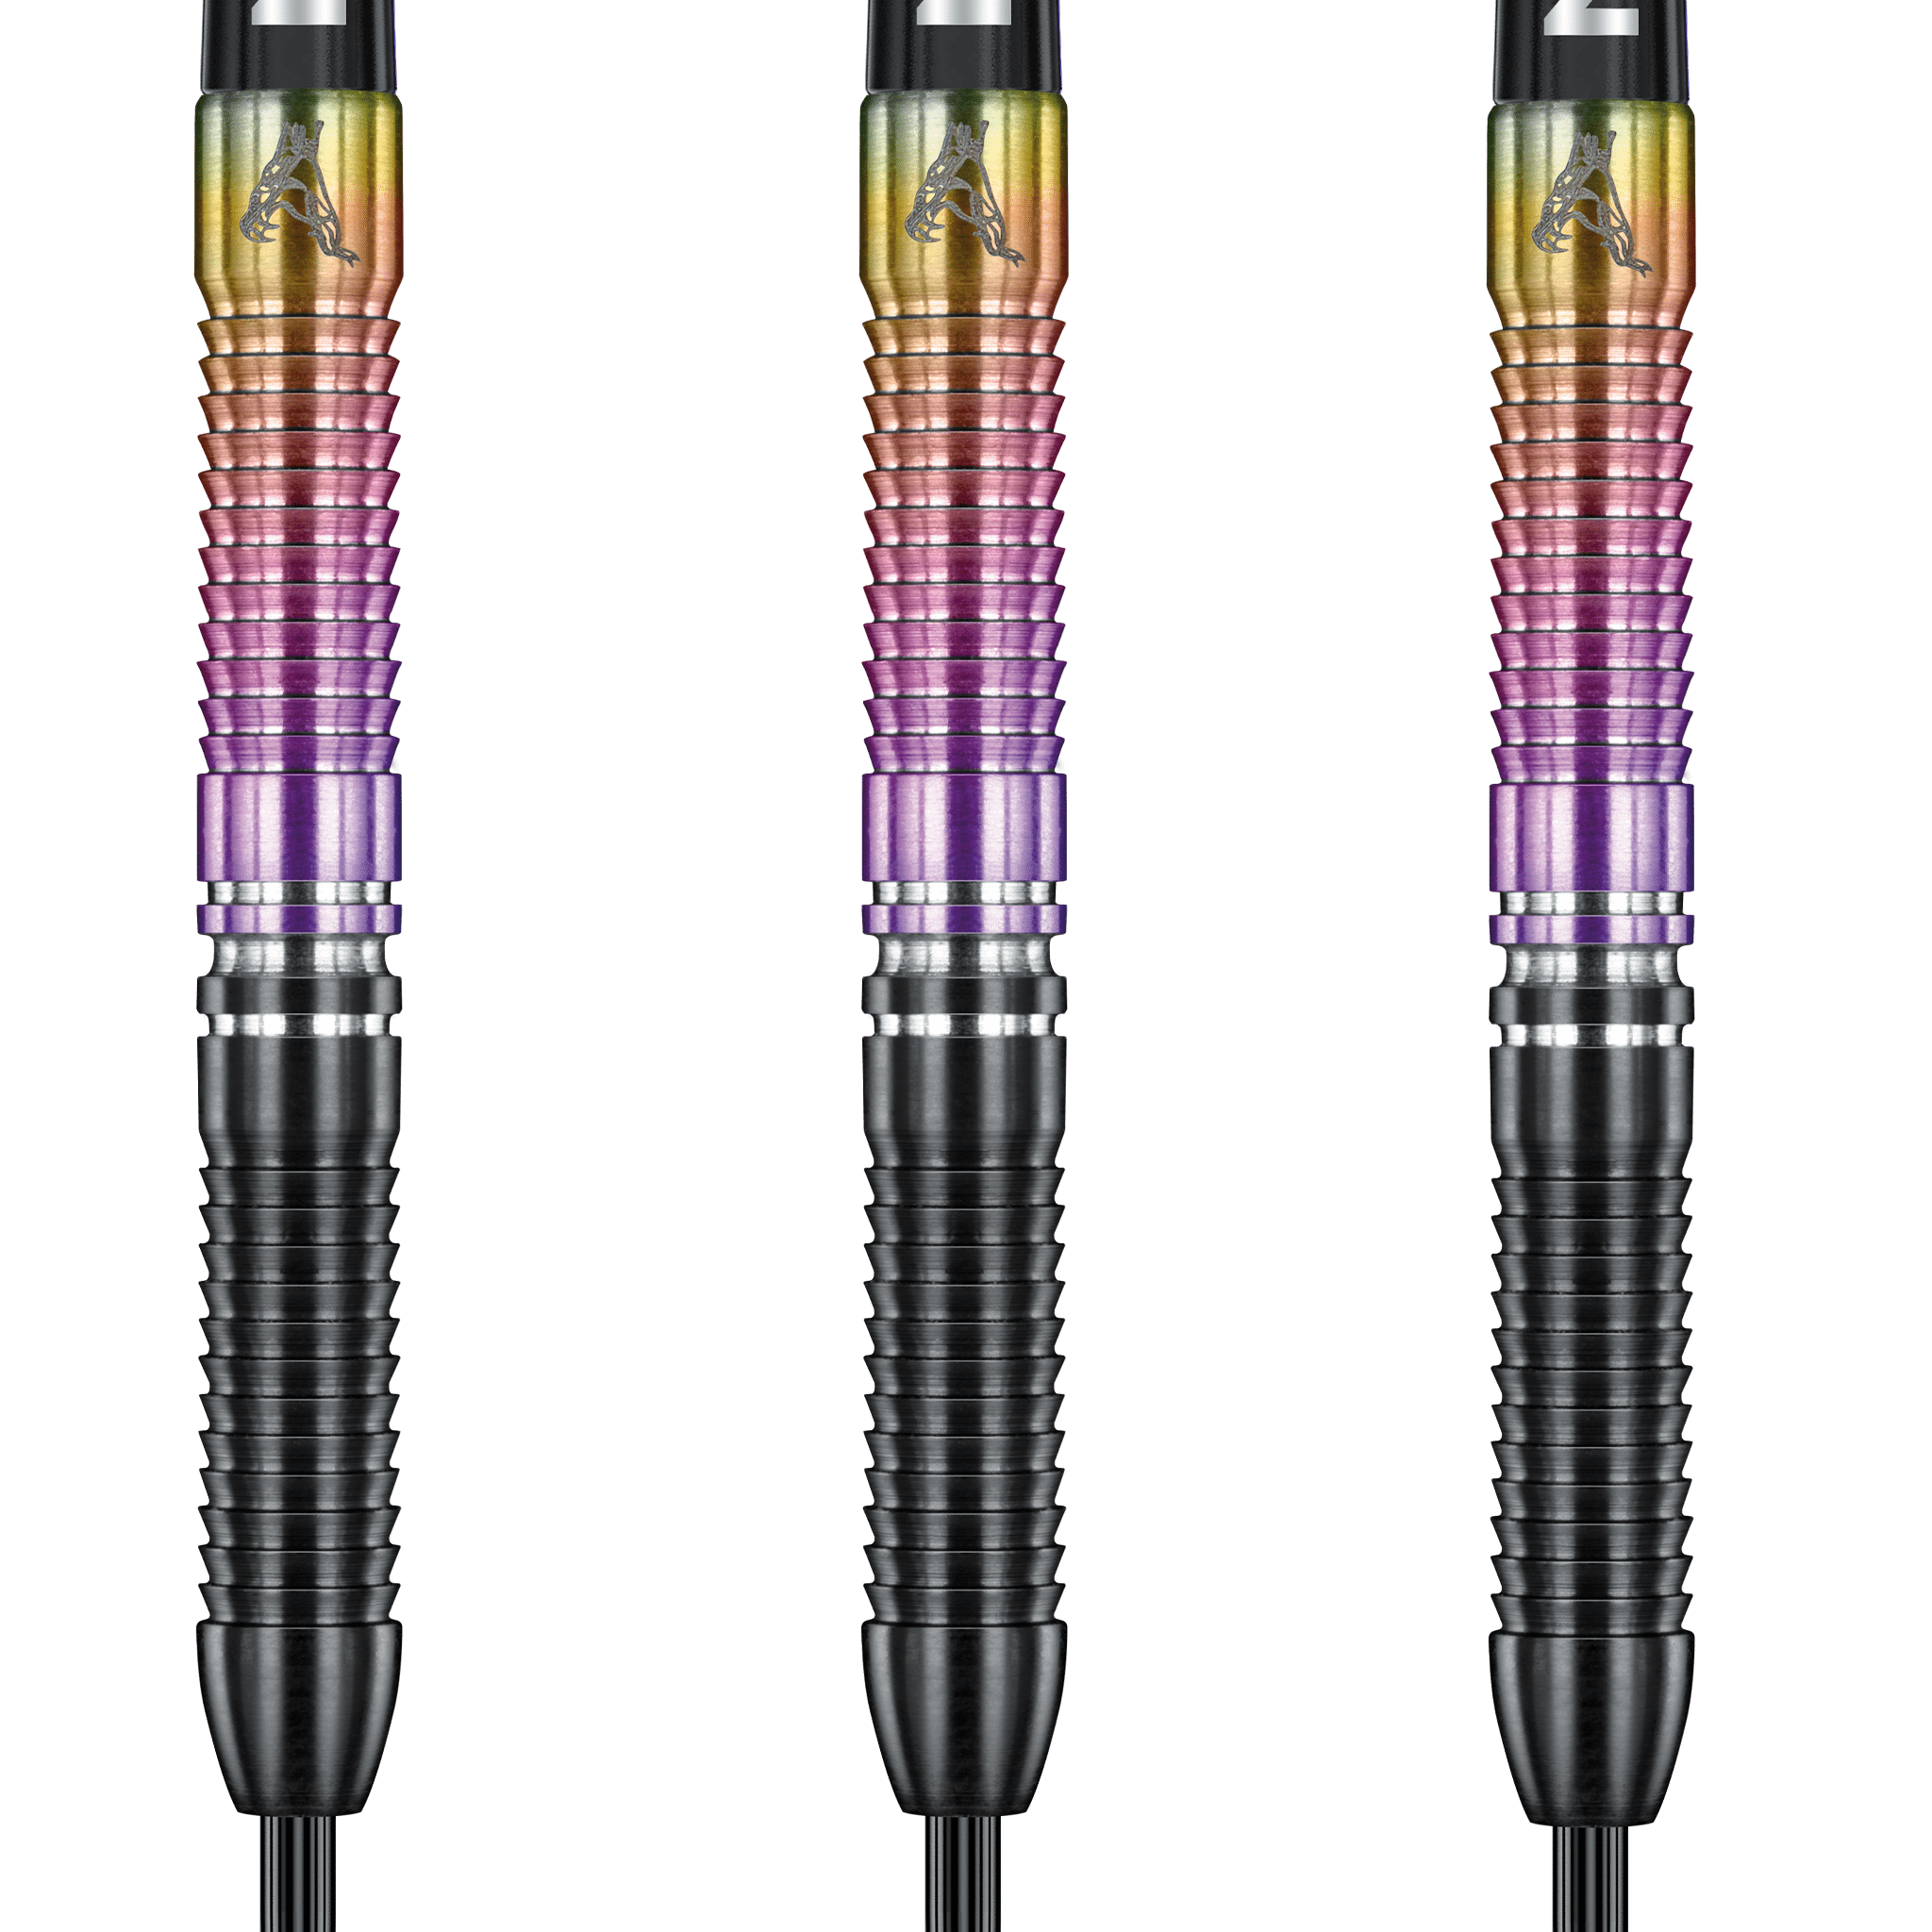 Red Dragon Peter Wright World Champion Special Edition 2020 Steel Tip Darts - 90% Tungsten - 21 Grams Darts